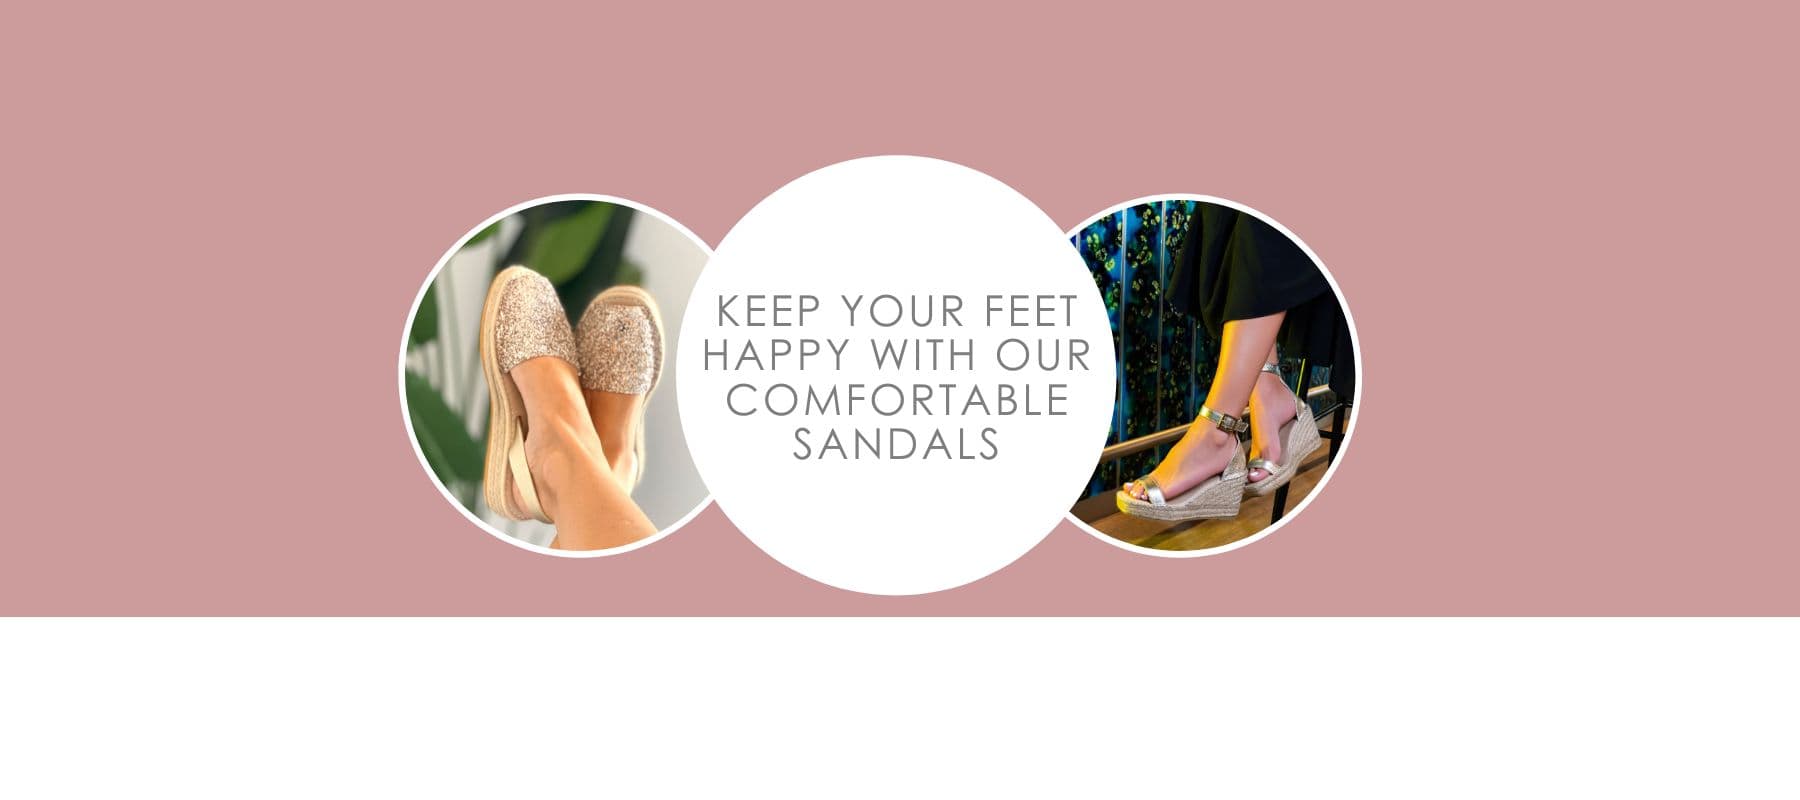 Keep Your Feet Happy with Our Comfortable Sandals - Shoeq